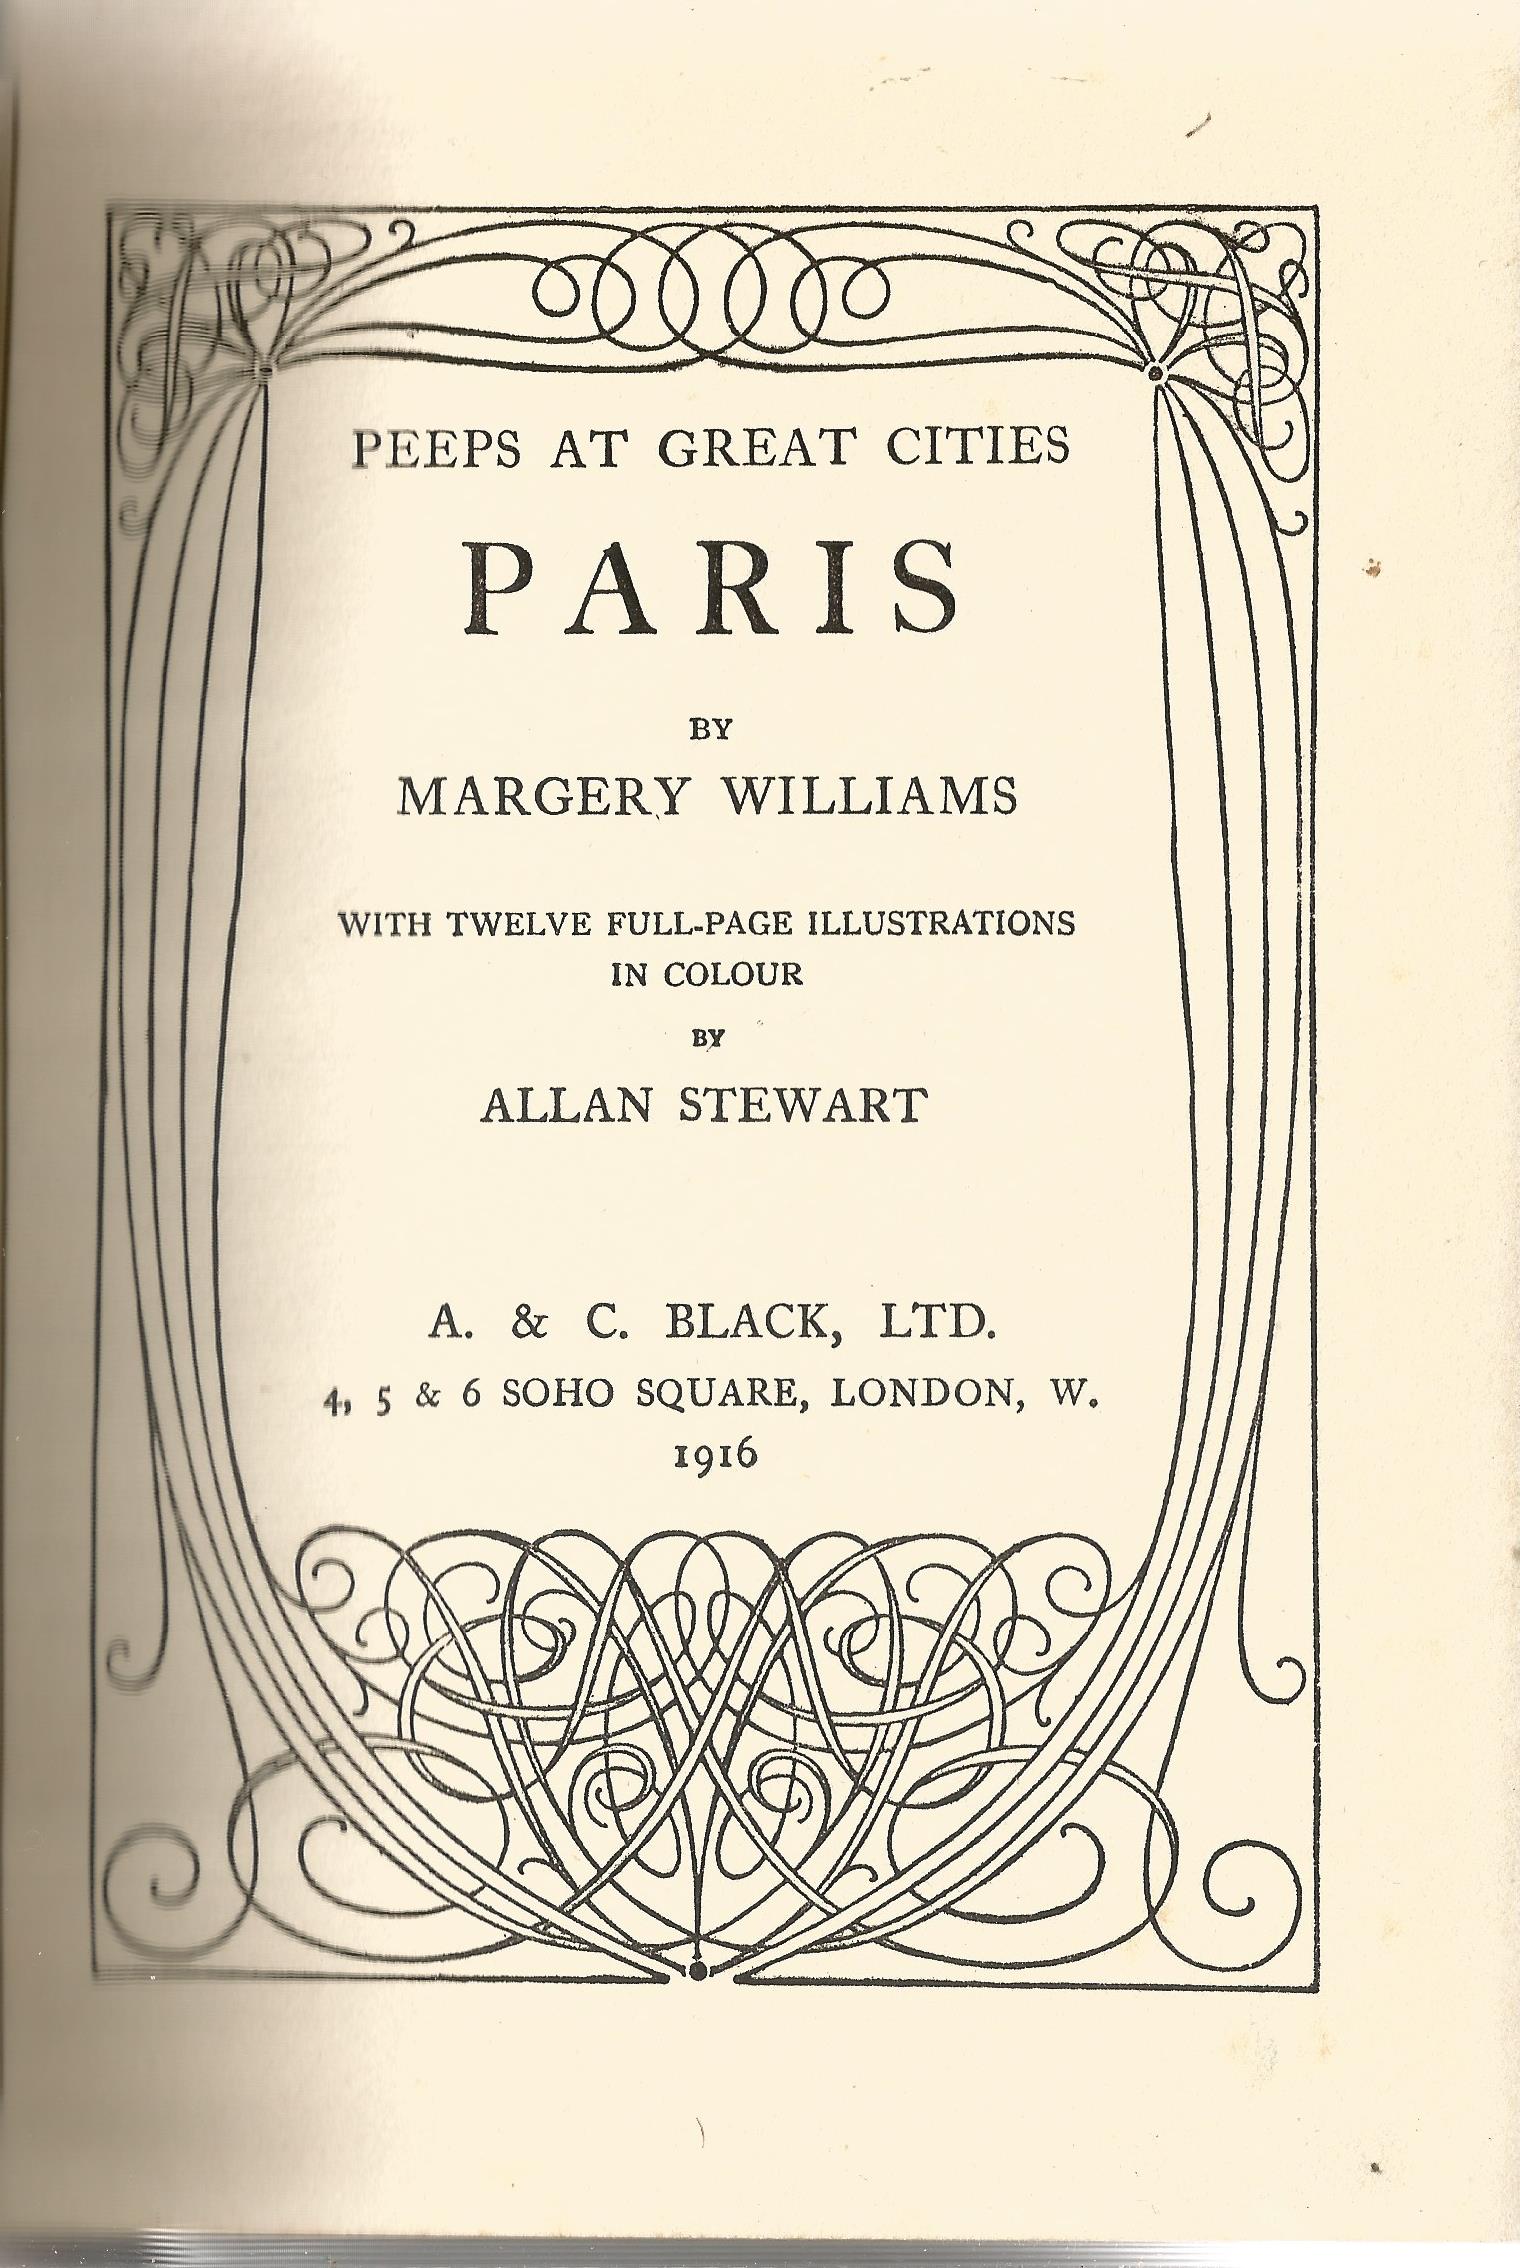 Allan Stewart hardback book Peeps at Great Cities 1916 published by A C Black Ltd in good condition. - Image 2 of 2